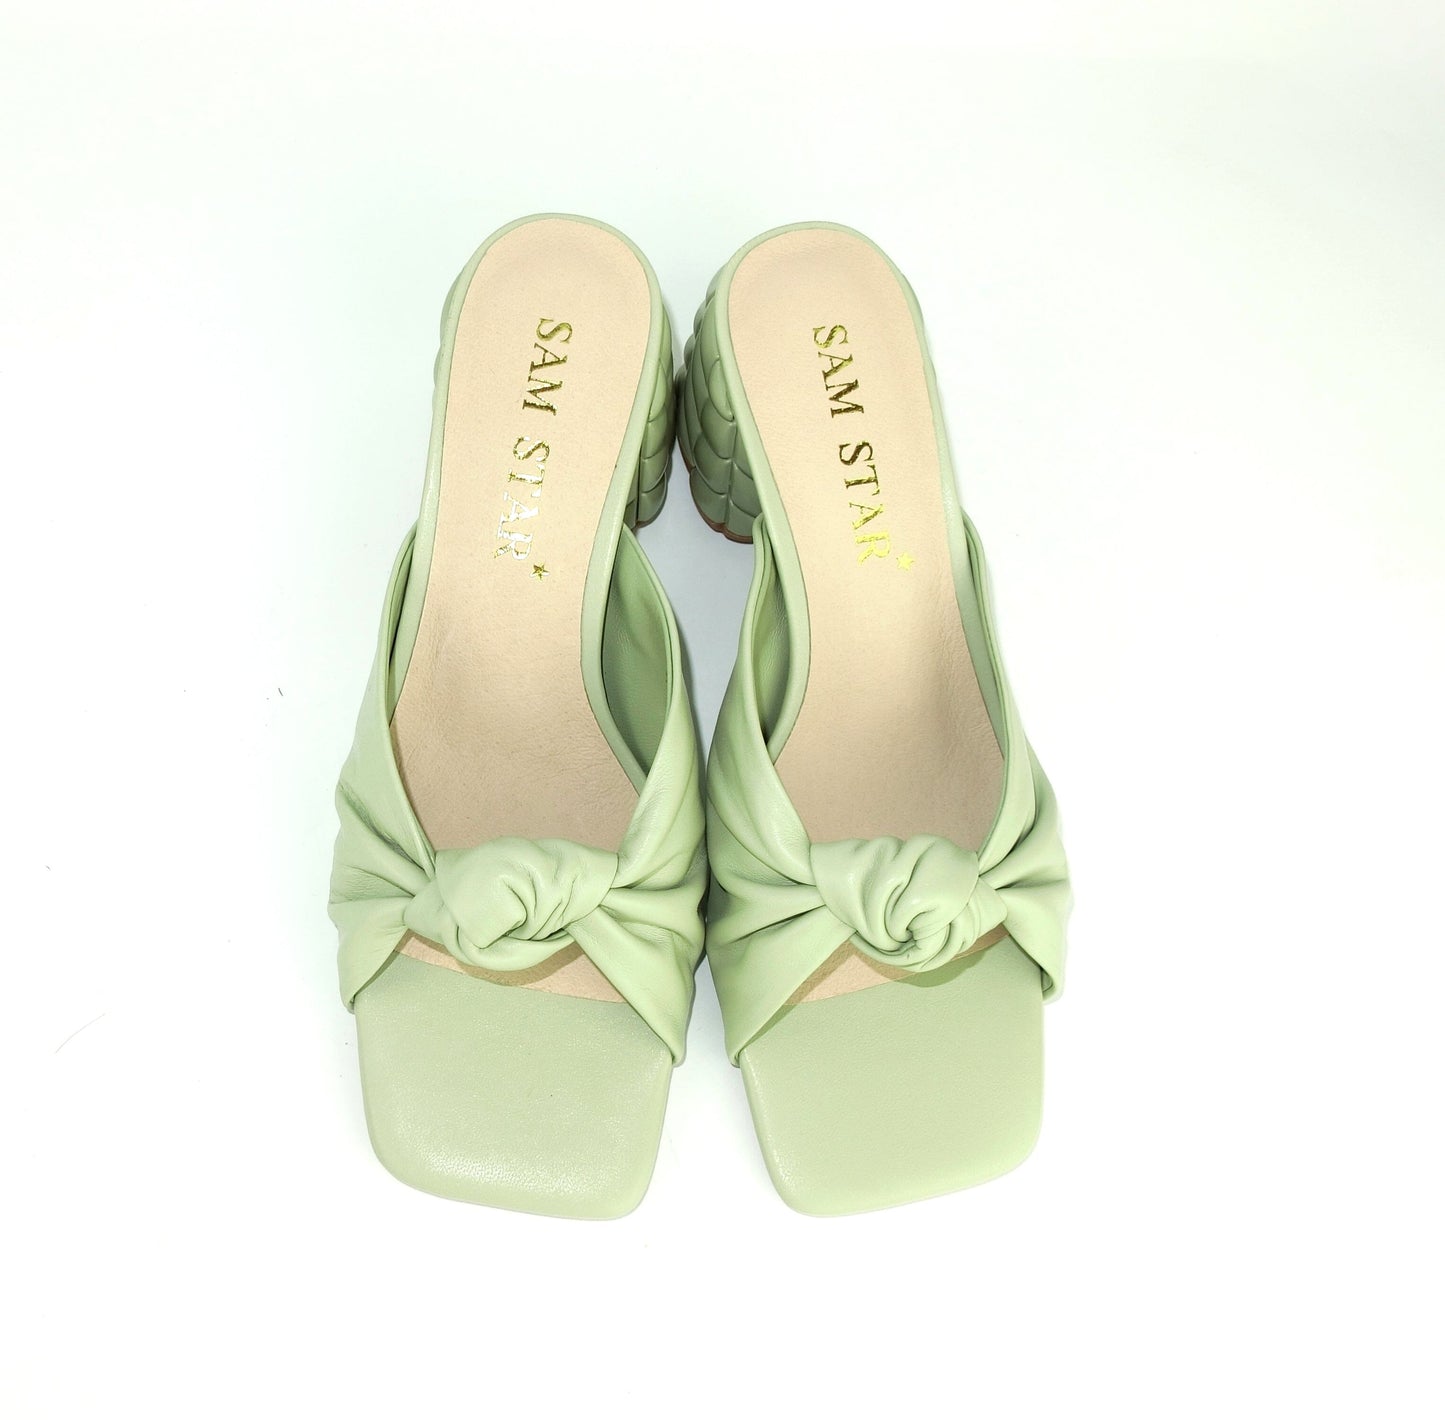 SS22013 Genuine leather bow tie block heel sandals in Mint sandals Sam Star Shoes Mint 39/6 